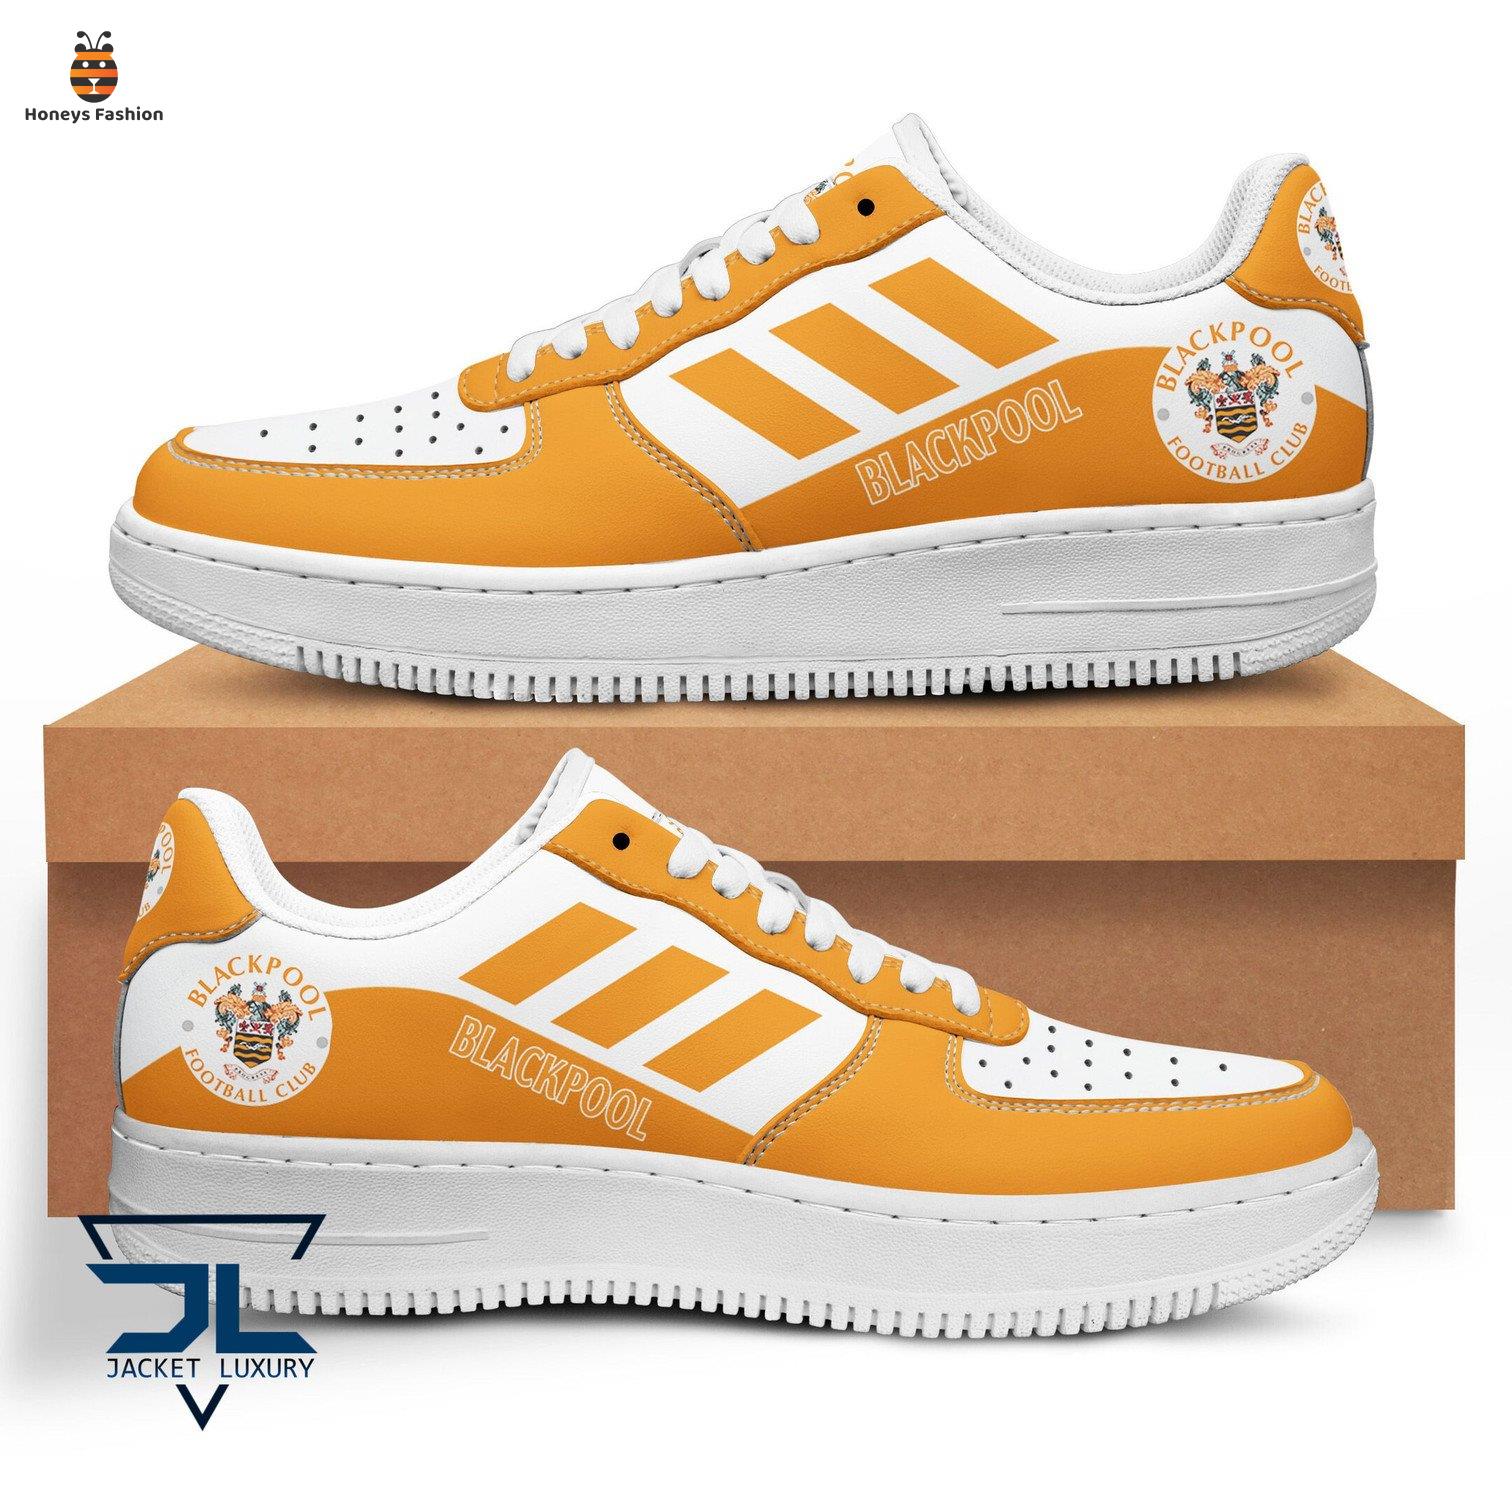 Blackpool F.C air force 1 shoes